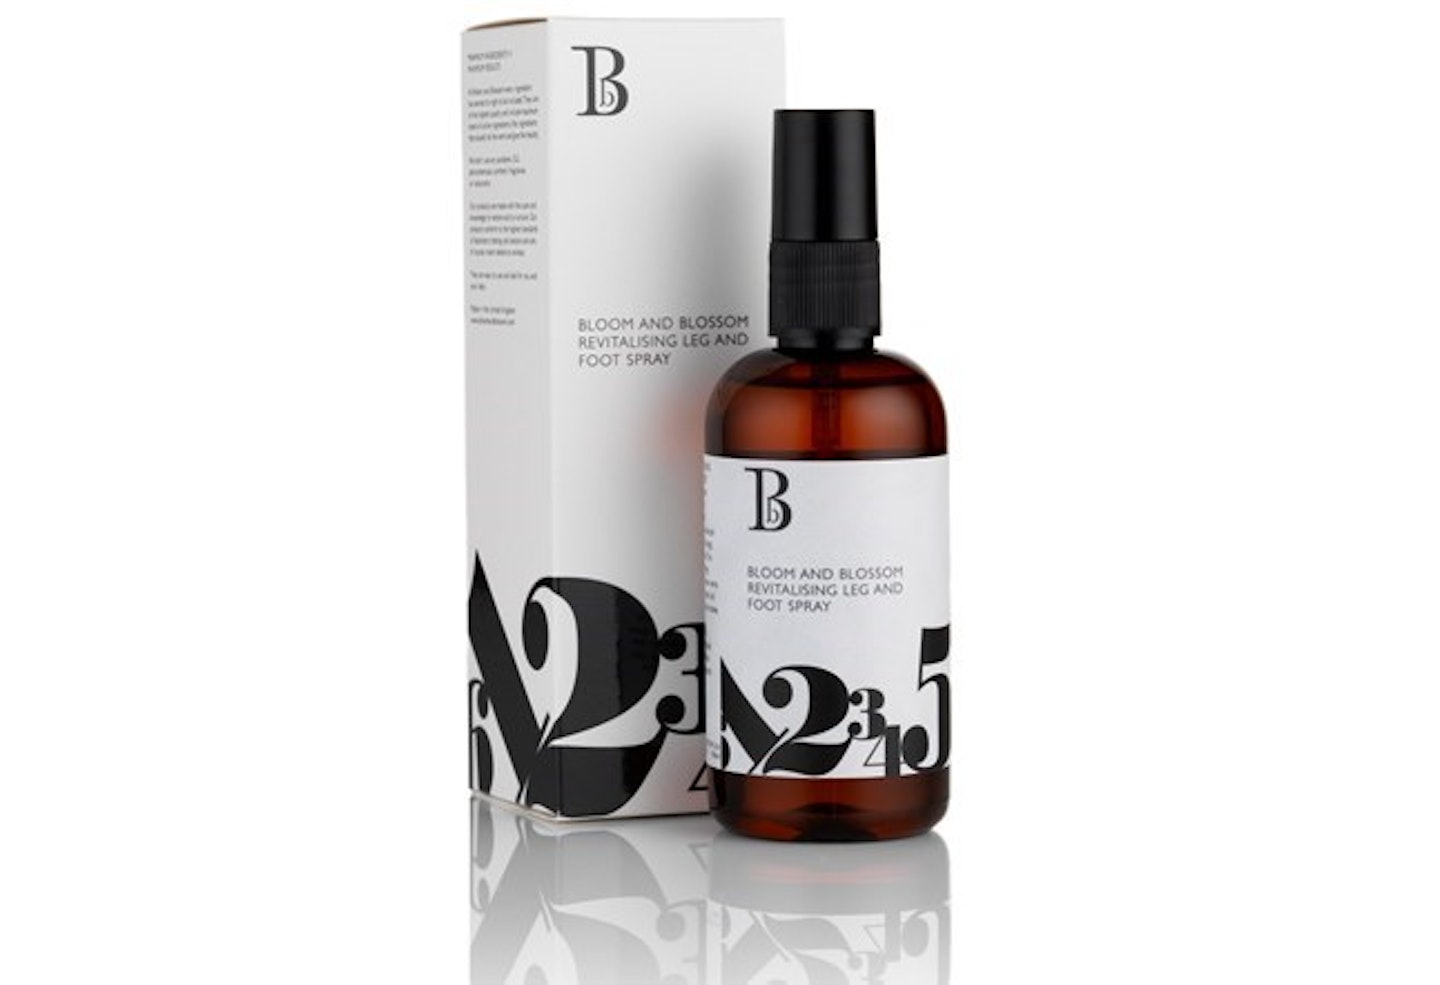 bloom-and-blossom-revitalising-leg-and-foot-spray-2014